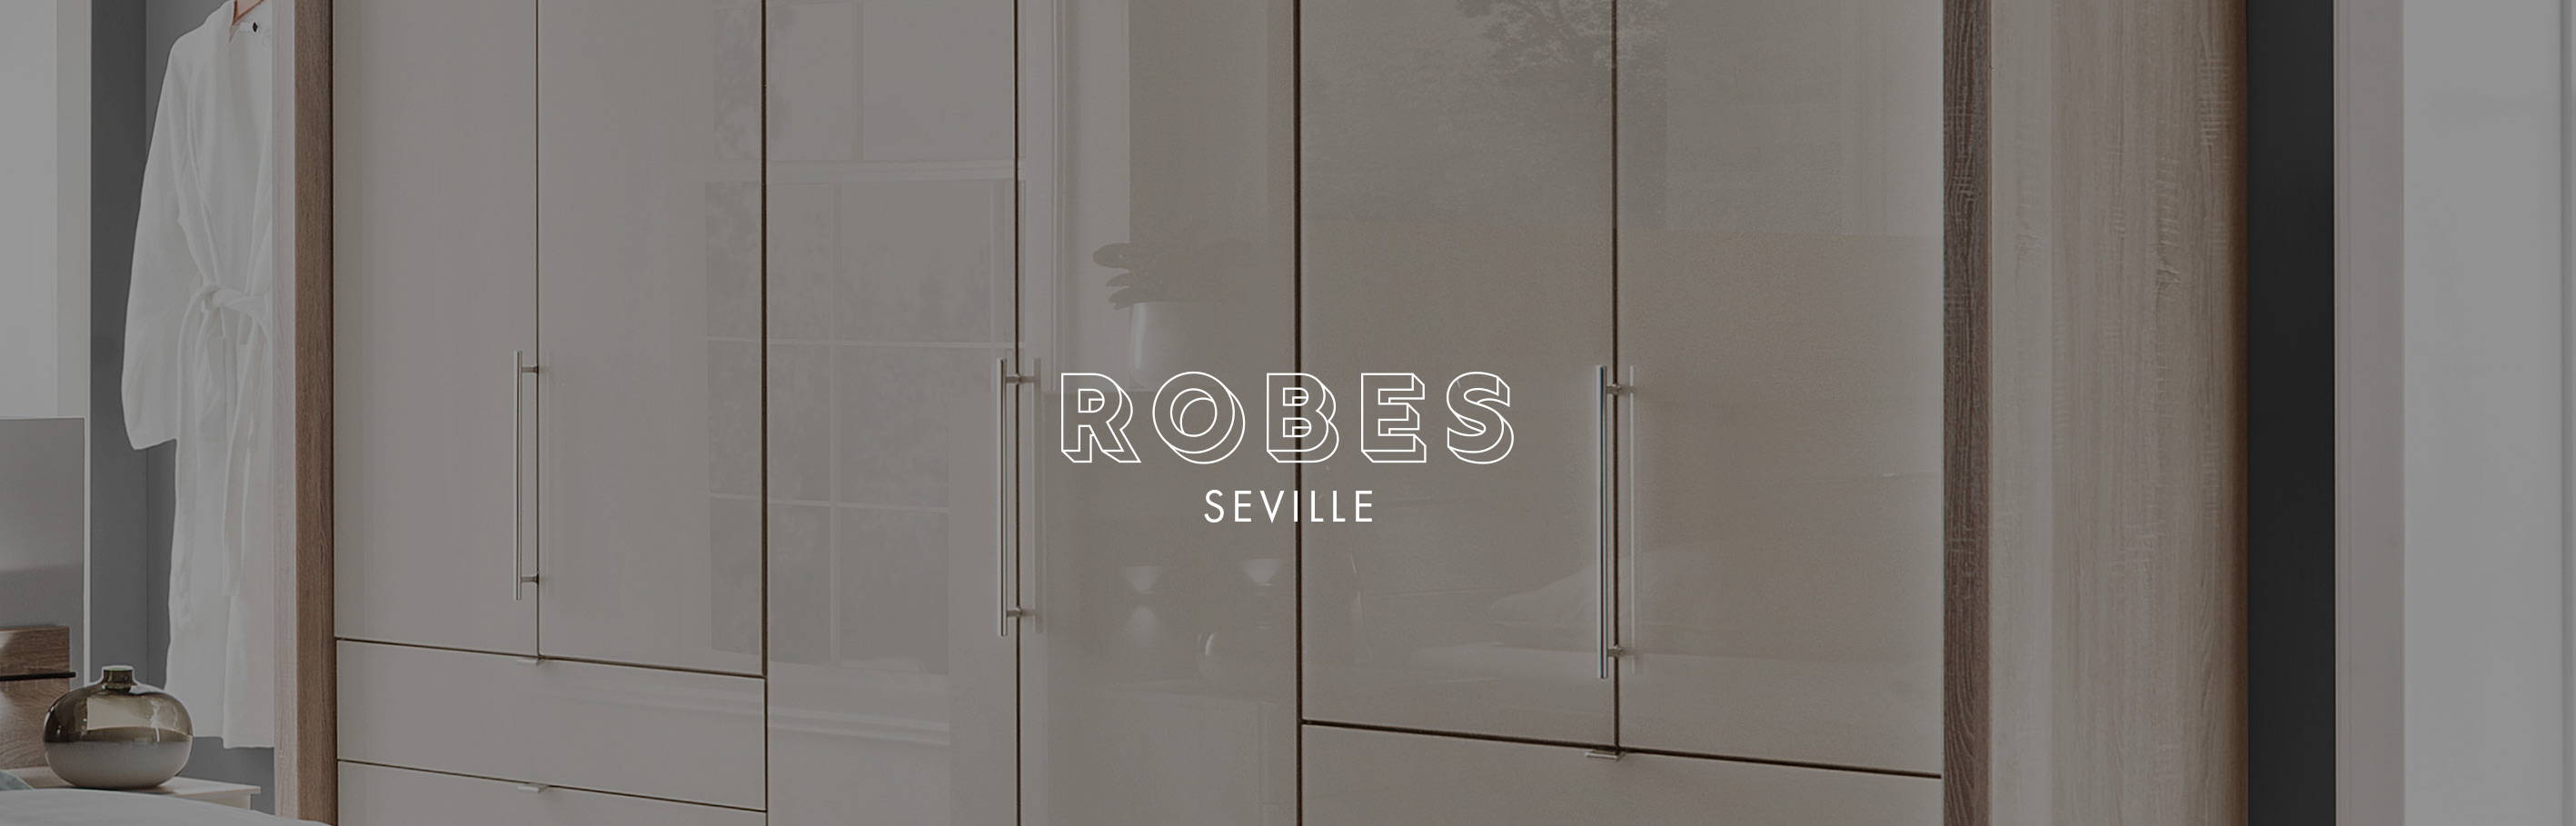 Robes Seville - Modular Wardrobes At BF Home In Norwich